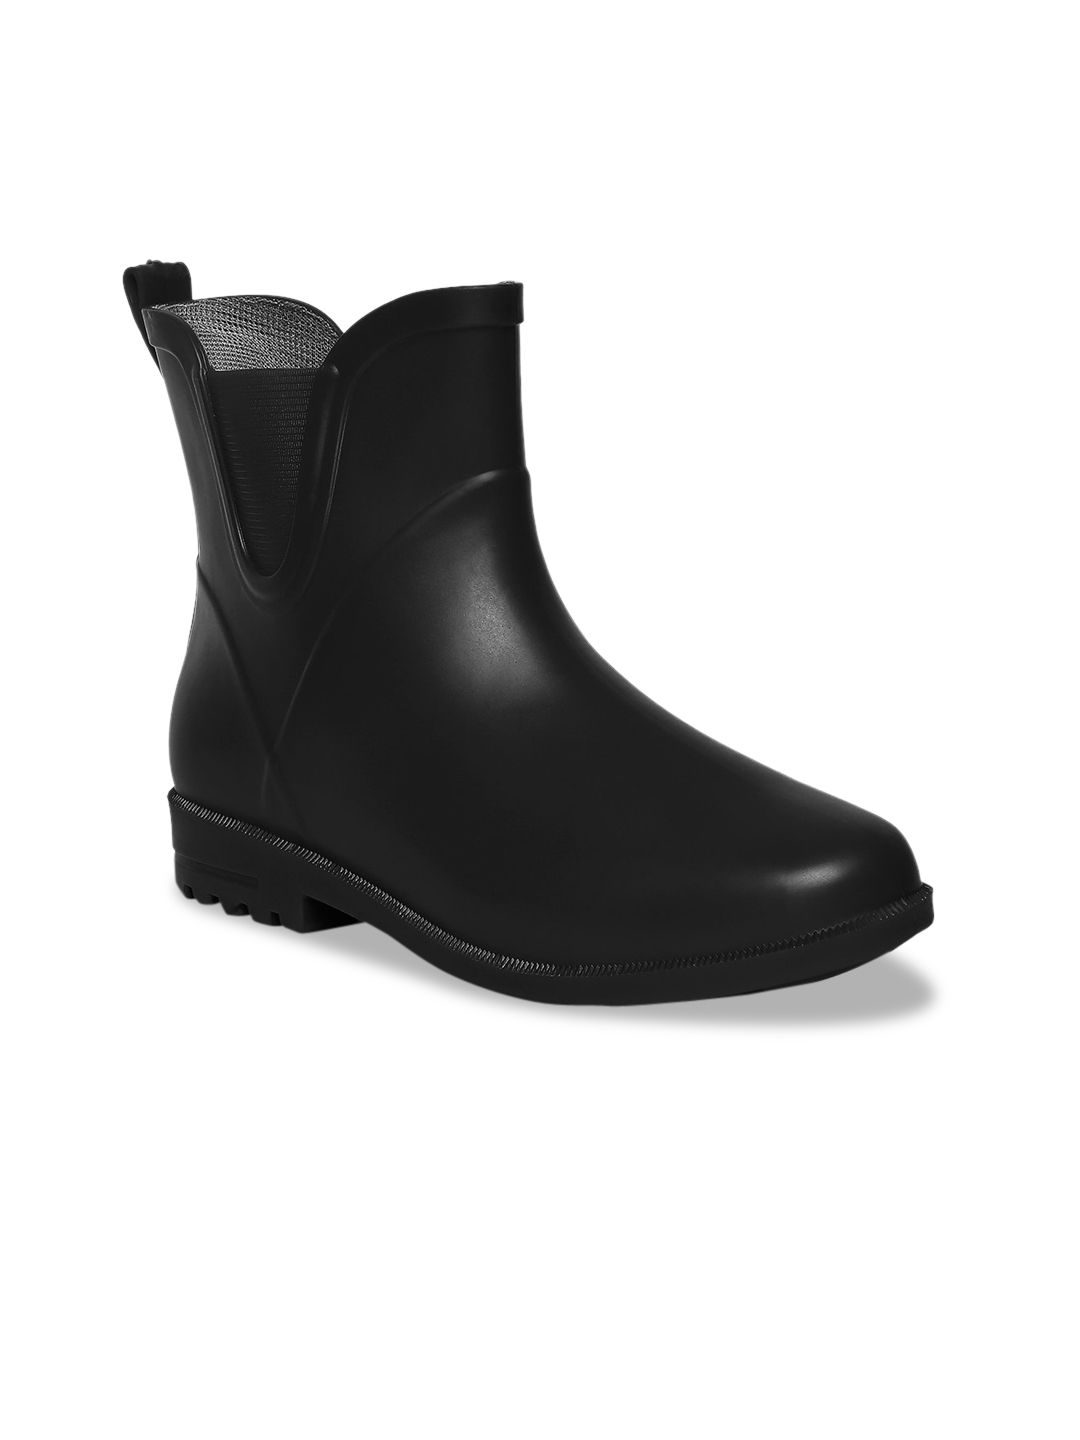 20Dresses Women Black Chelsea Boots Price in India